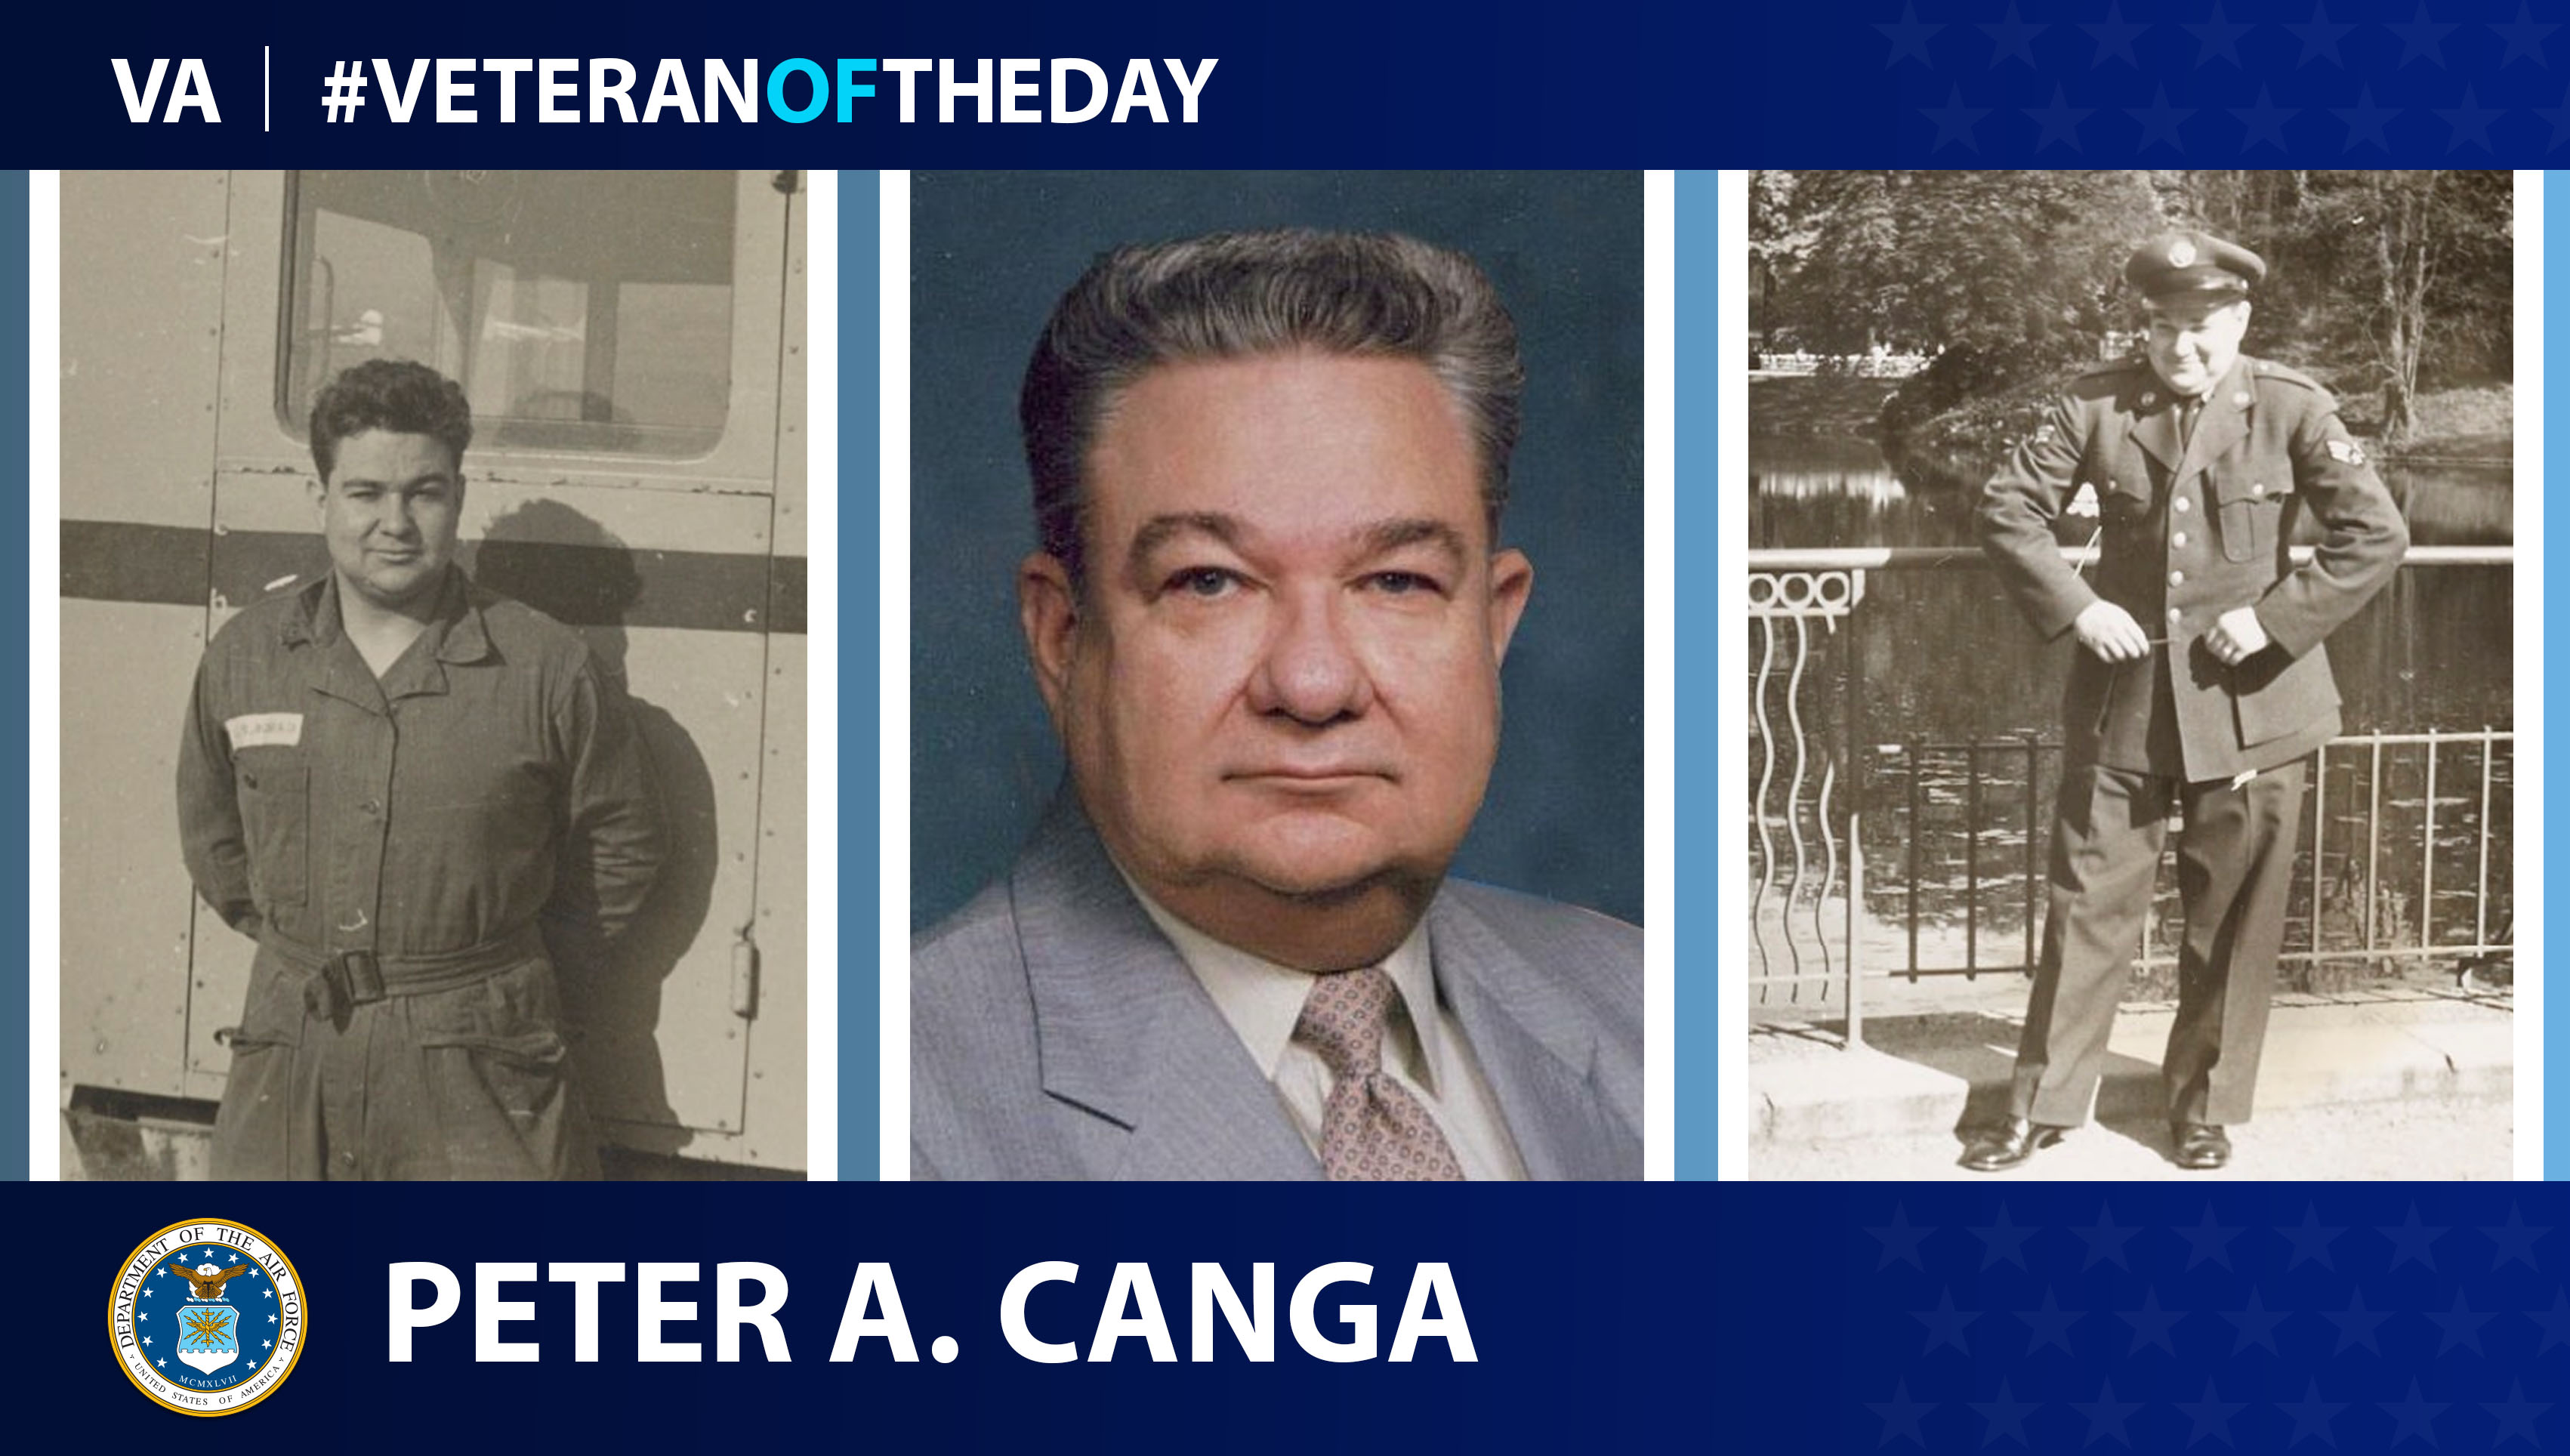 Air Force Veteran Peter Canga is today's Veteran of the Day.